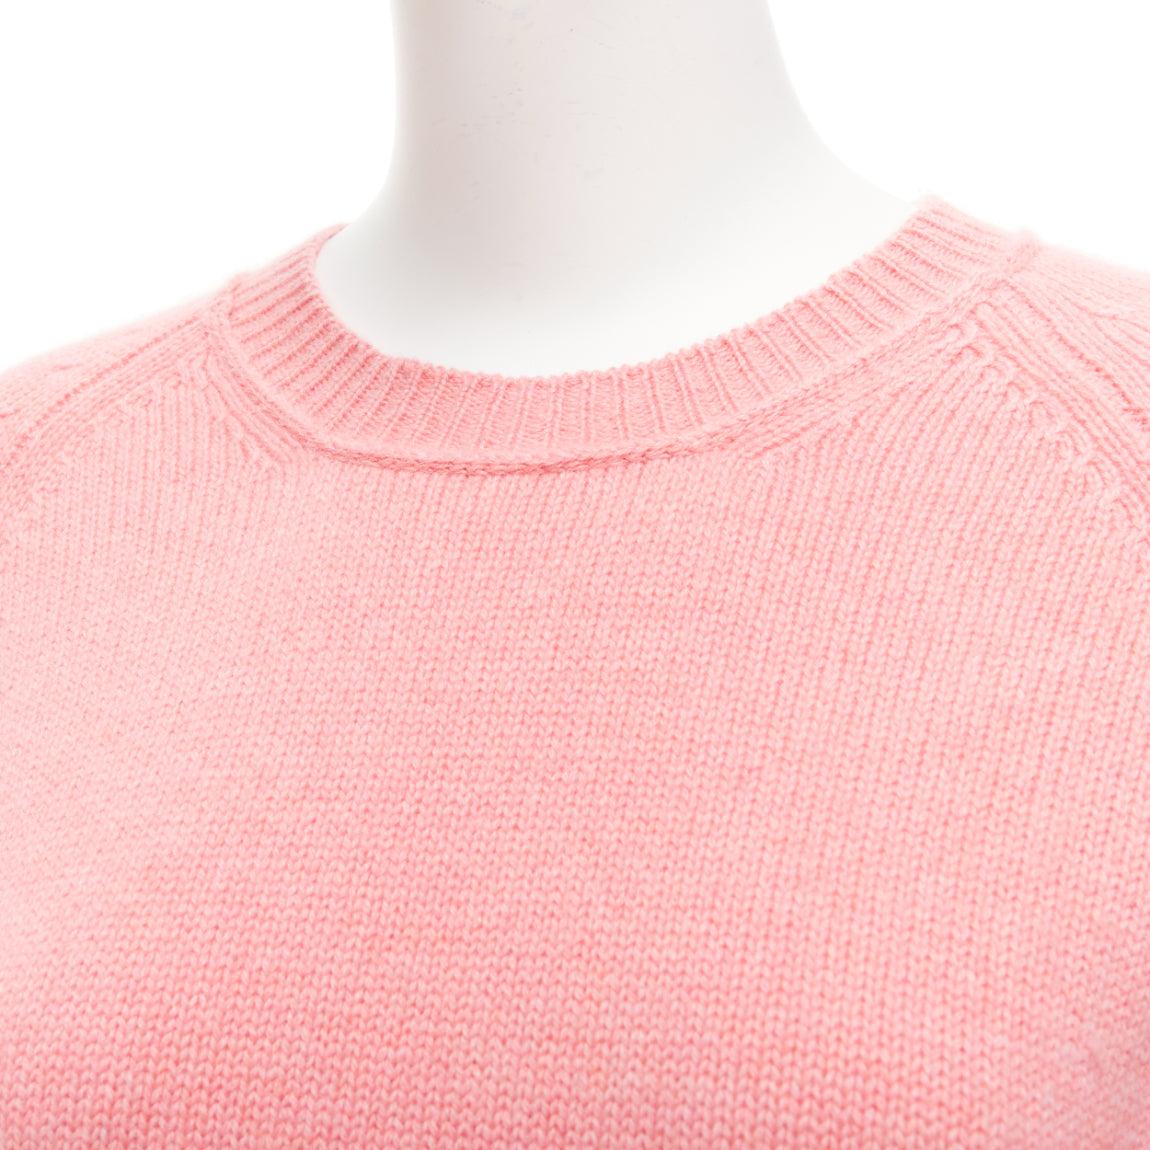 ALEXANDRA GOLOVANOFF Tricot Parisiens 100% cashmere pink long sleeve sweater L
Reference: NKLL/A00151
Brand: Alexandra Golovanoff
Collection: Tricot Parisiens
Material: Cashmere
Color: Pink
Pattern: Solid
Closure: Slip On
Extra Details: Stitch logo